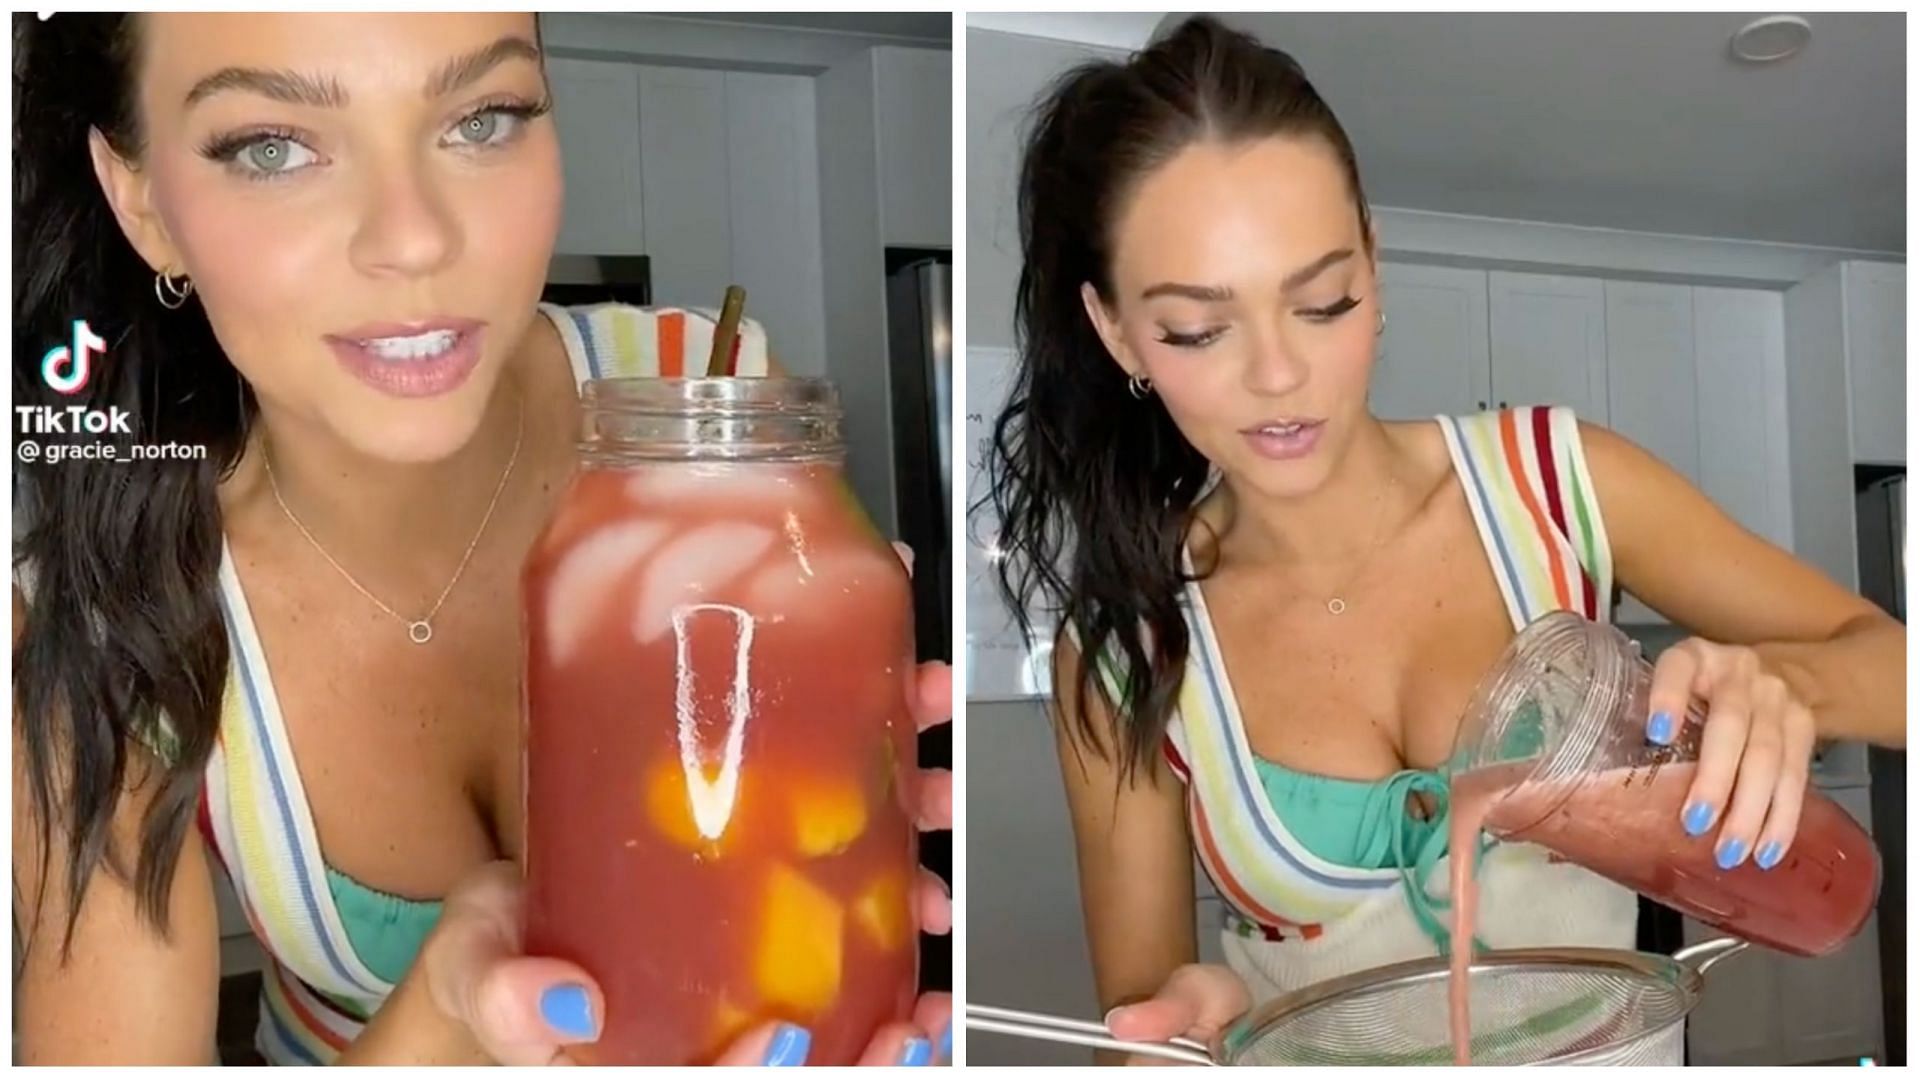 Gracie Norton&#039;s spa water lands in controversy; ends up getting her account deleted. (Image via @gracie_norton/TikTok)